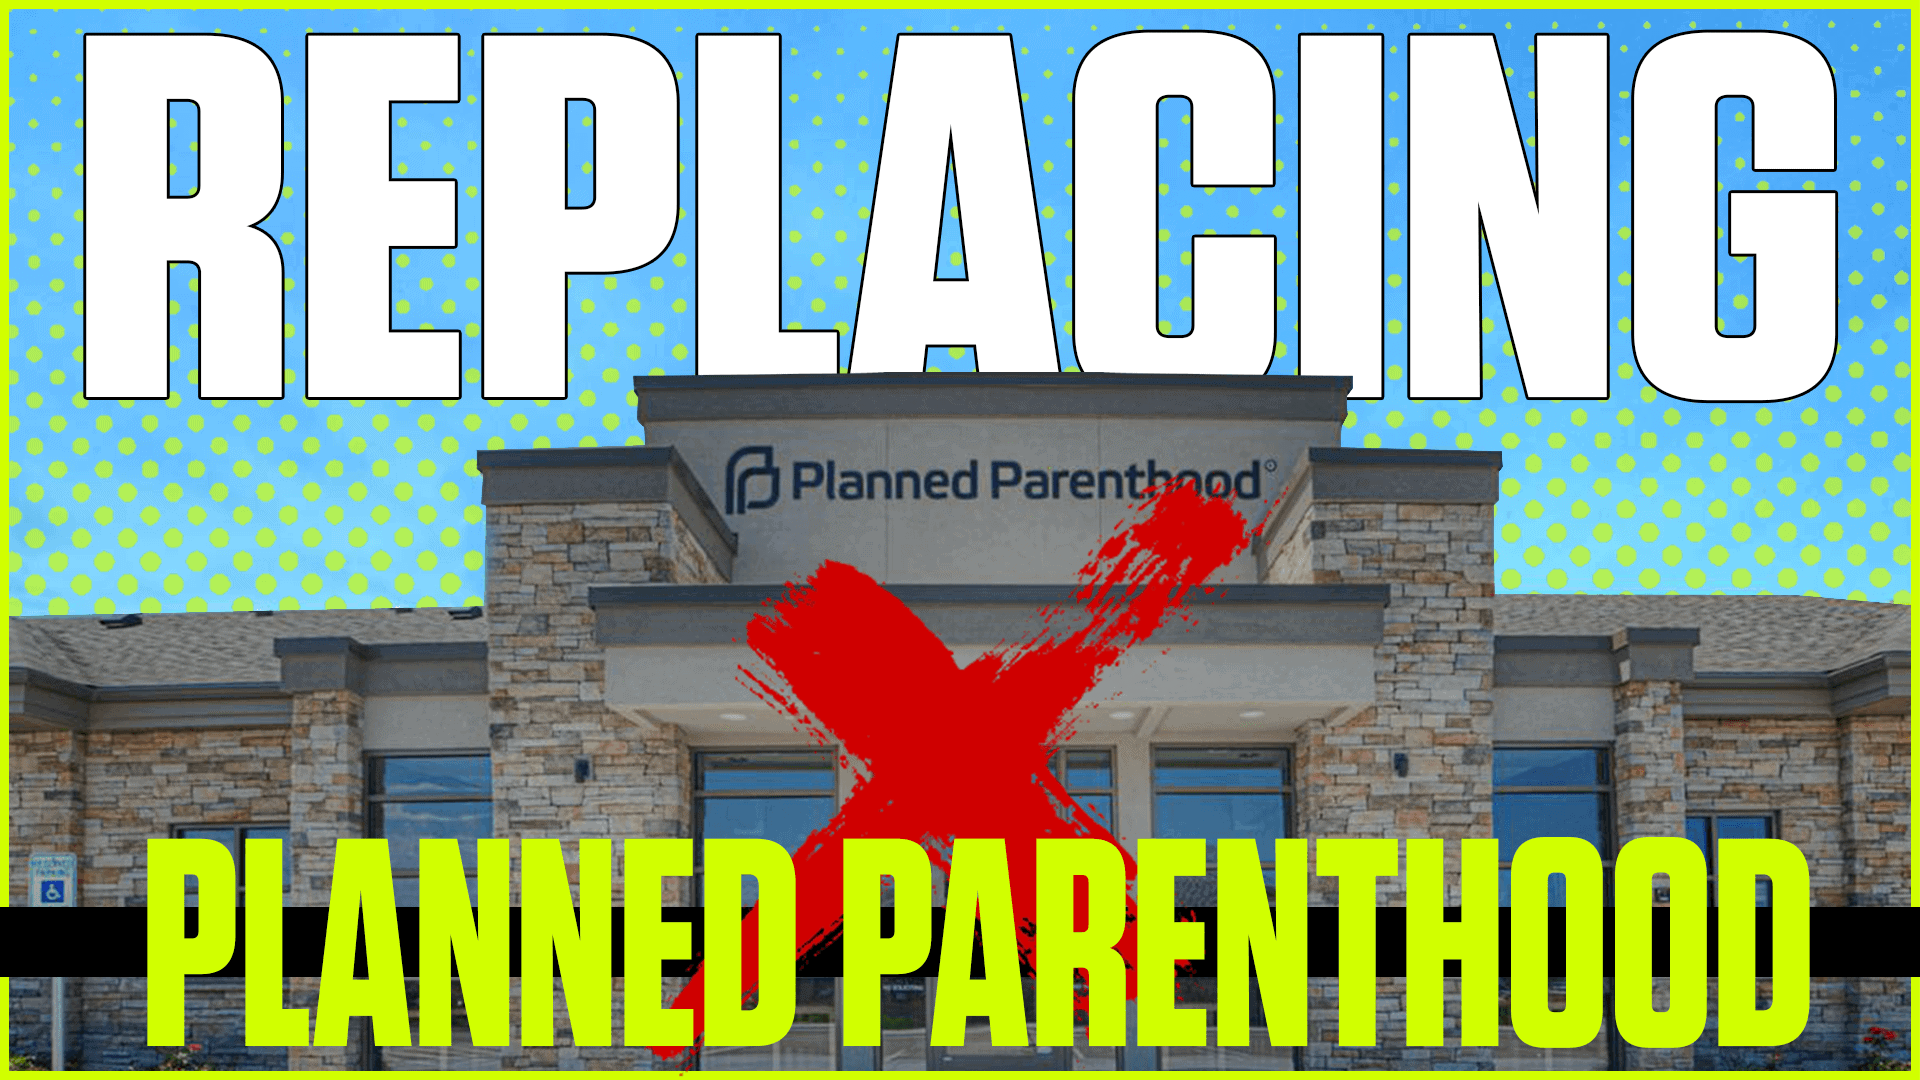 Location. Location. Location. How to Replace Planned Parenthood | Guest: Brandi Swindell | The Mark Harrington Show | 10-21-21